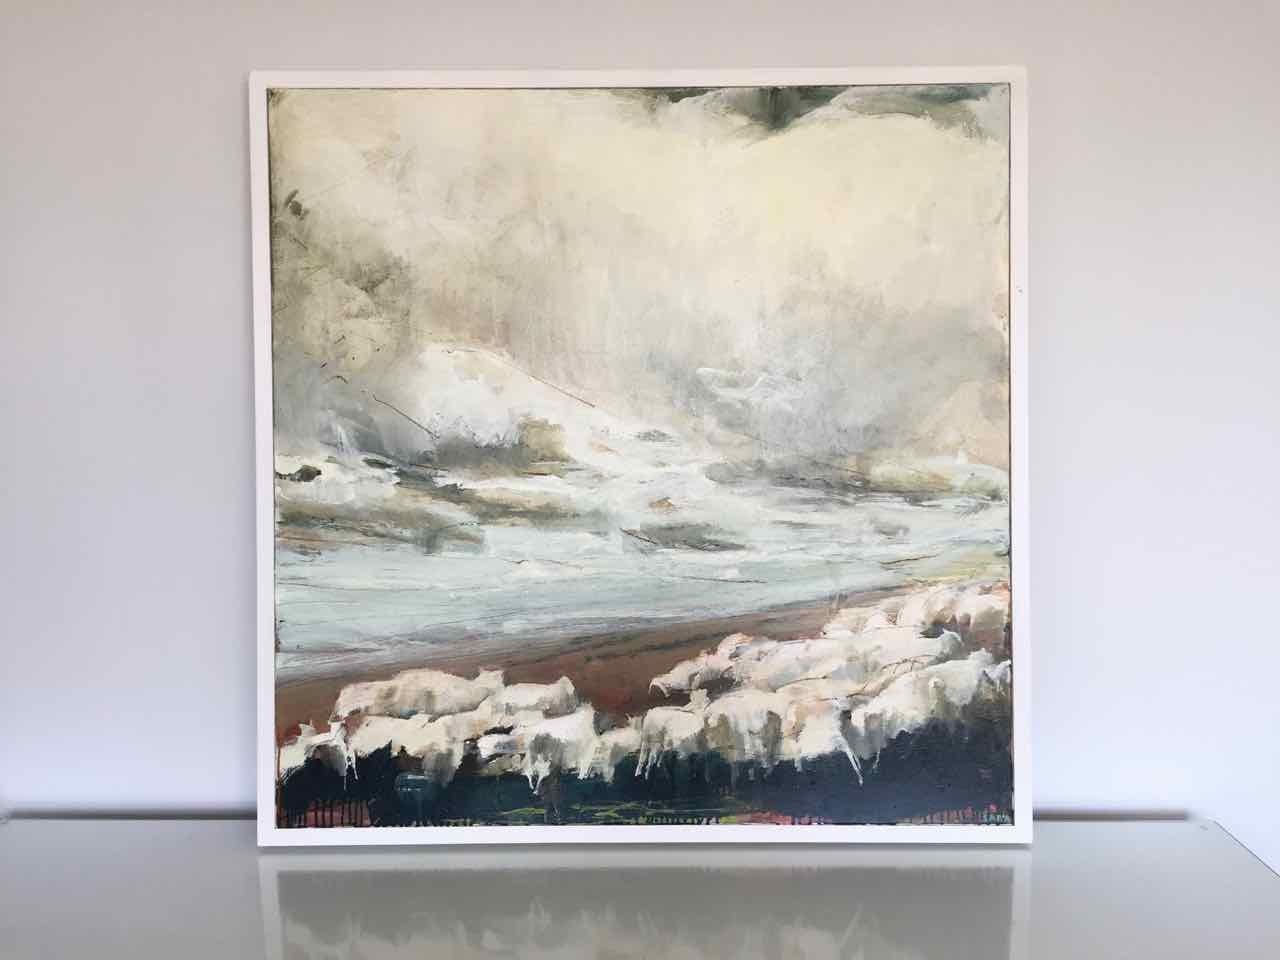 Cheviots (Hole of Horcum, Ryedale), 2018 by Sara Dudman RWA, Oil on stretched canvas

Sara paints with very gestural mark making, and this painting is part of her body of work which interprets the fascinating interactions and relationships between